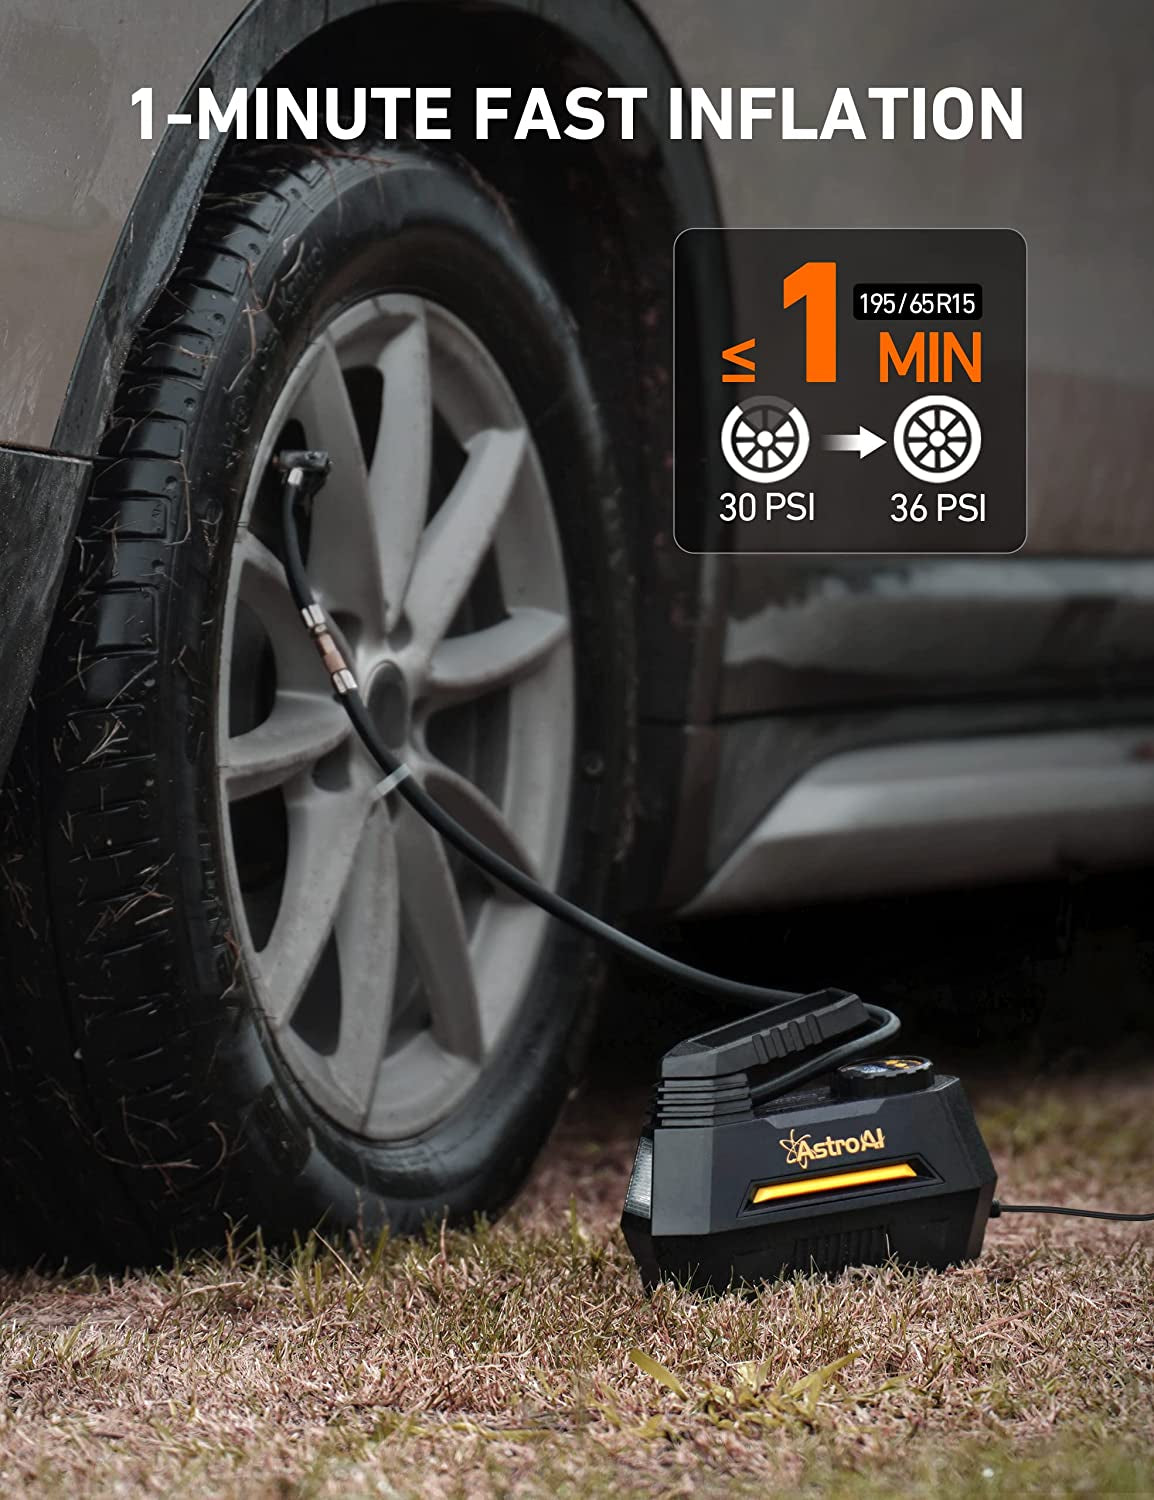 Portable 12V DC Tire Inflator with Digital Pressure Gauge and Emergency LED Light - Suitable for Car Tires, Bicycle, Balloons - Essential Car Accessory